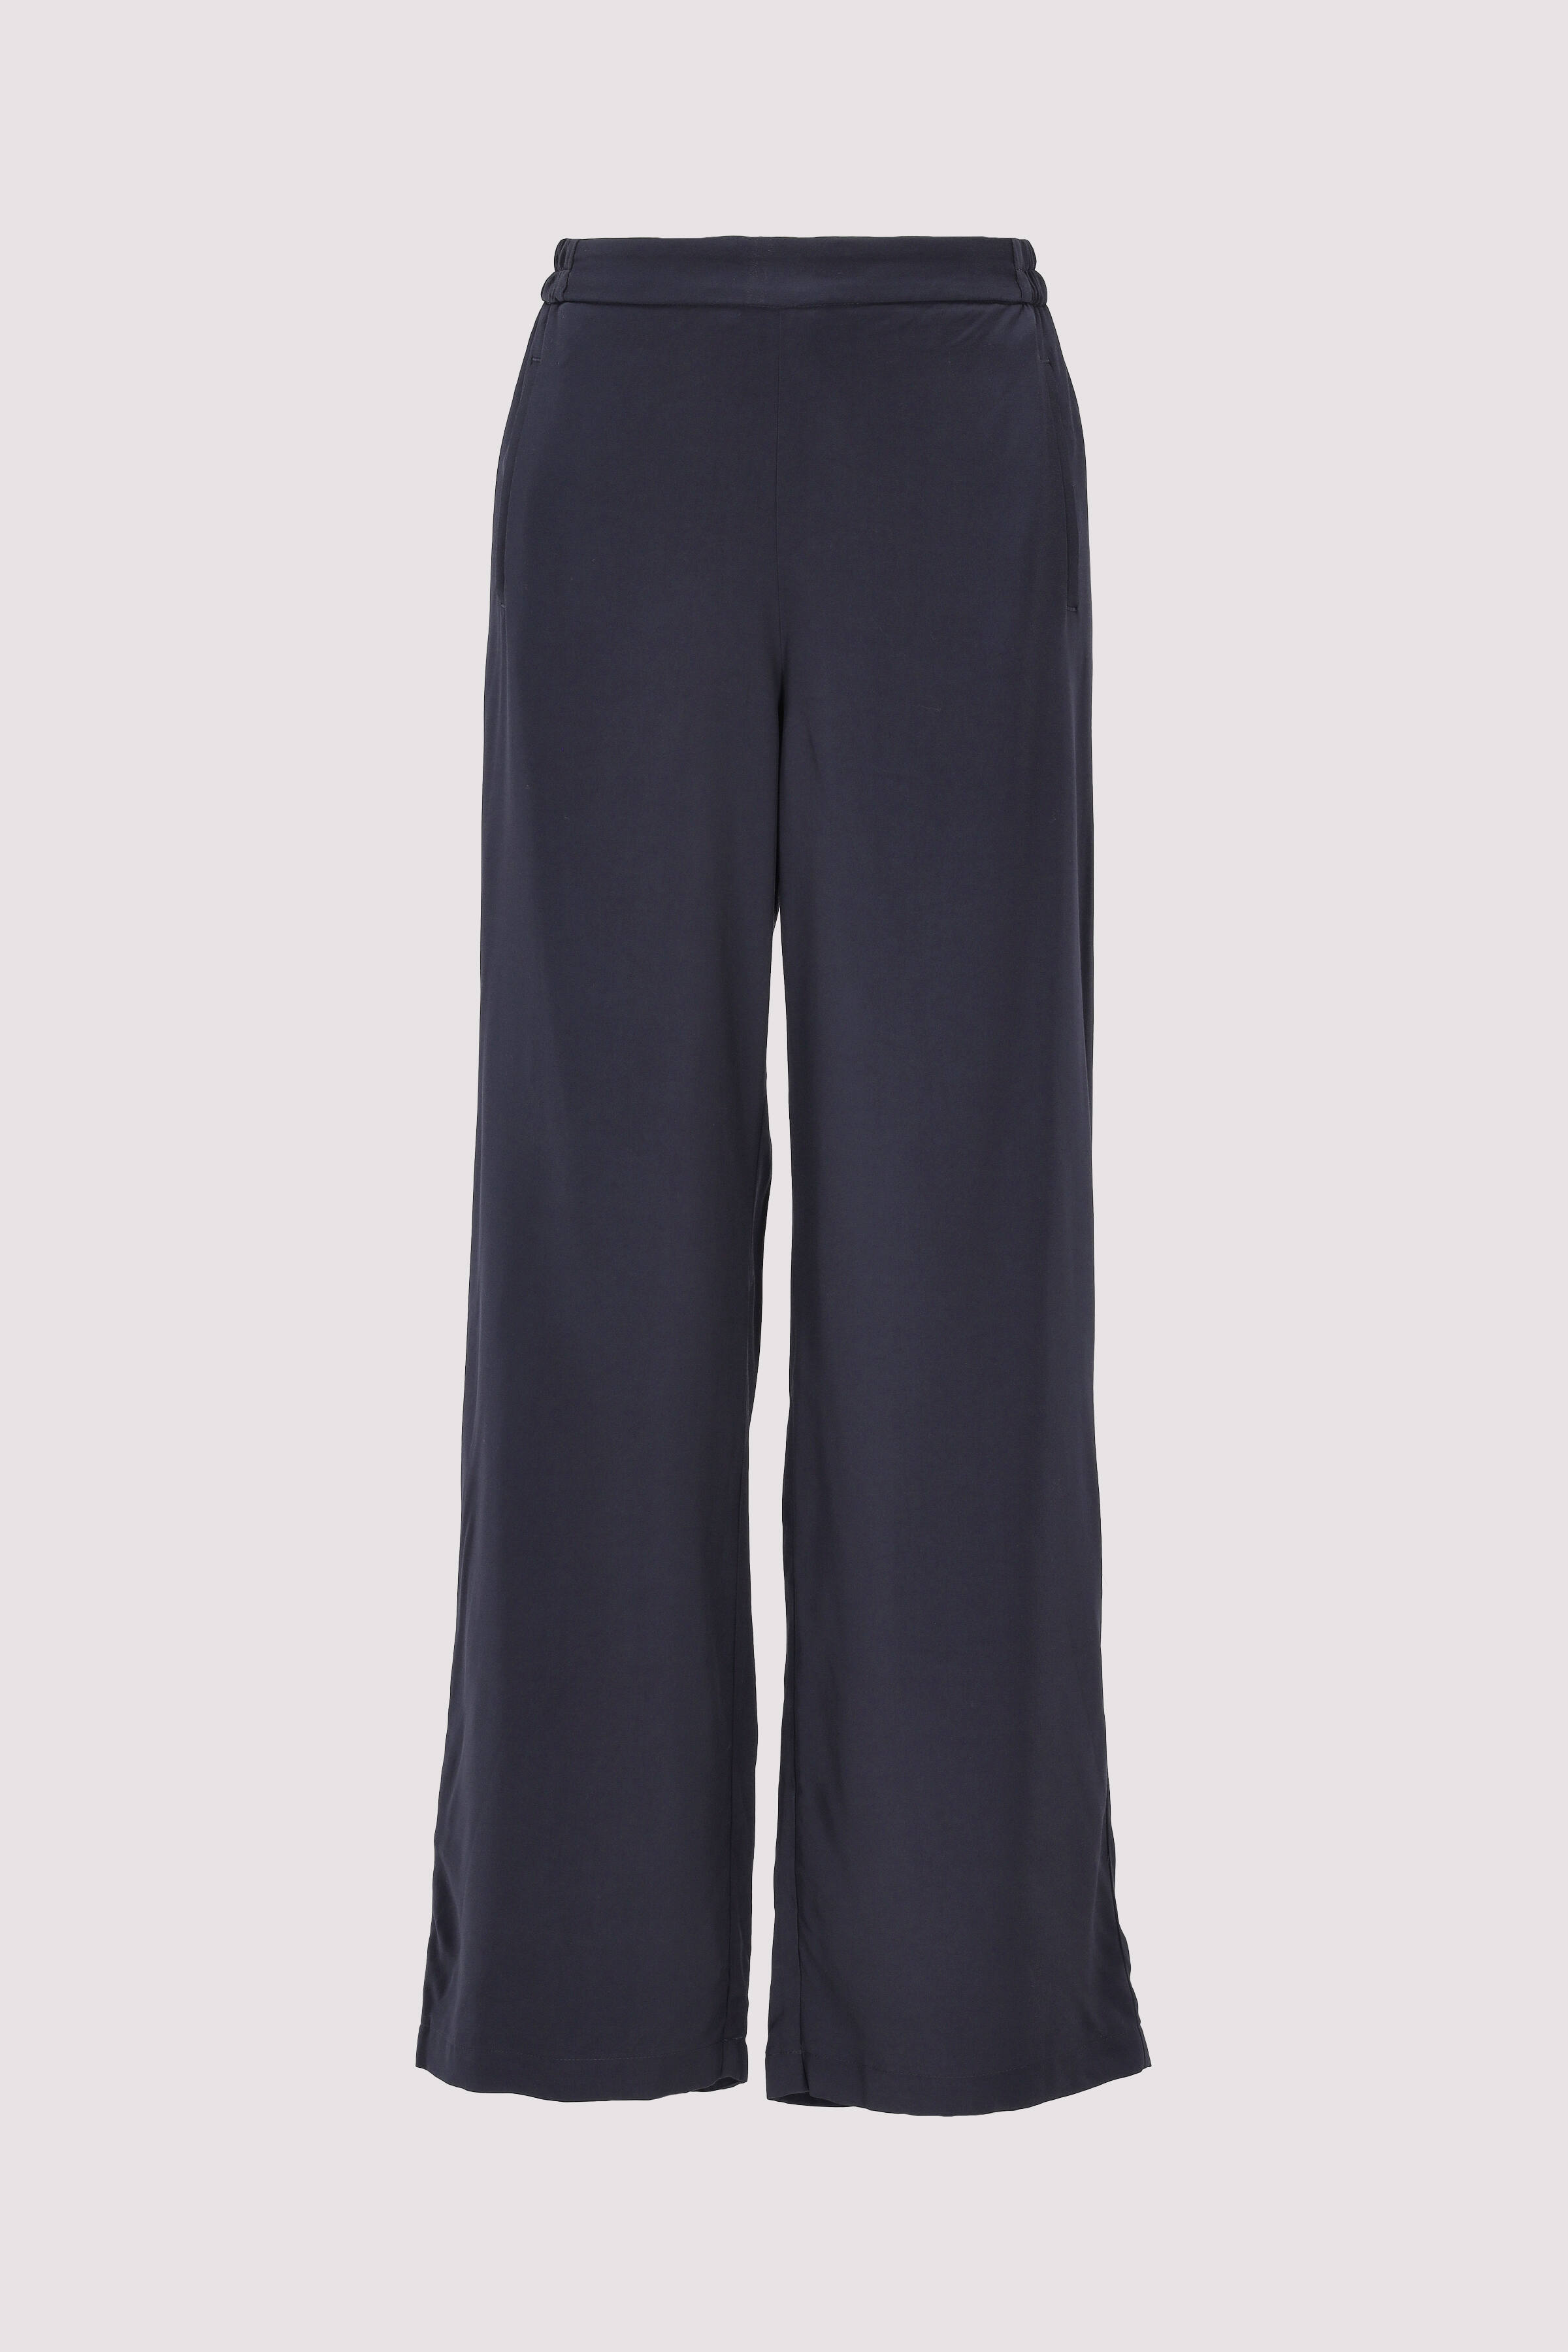 Pants, relaxed fluent style, w